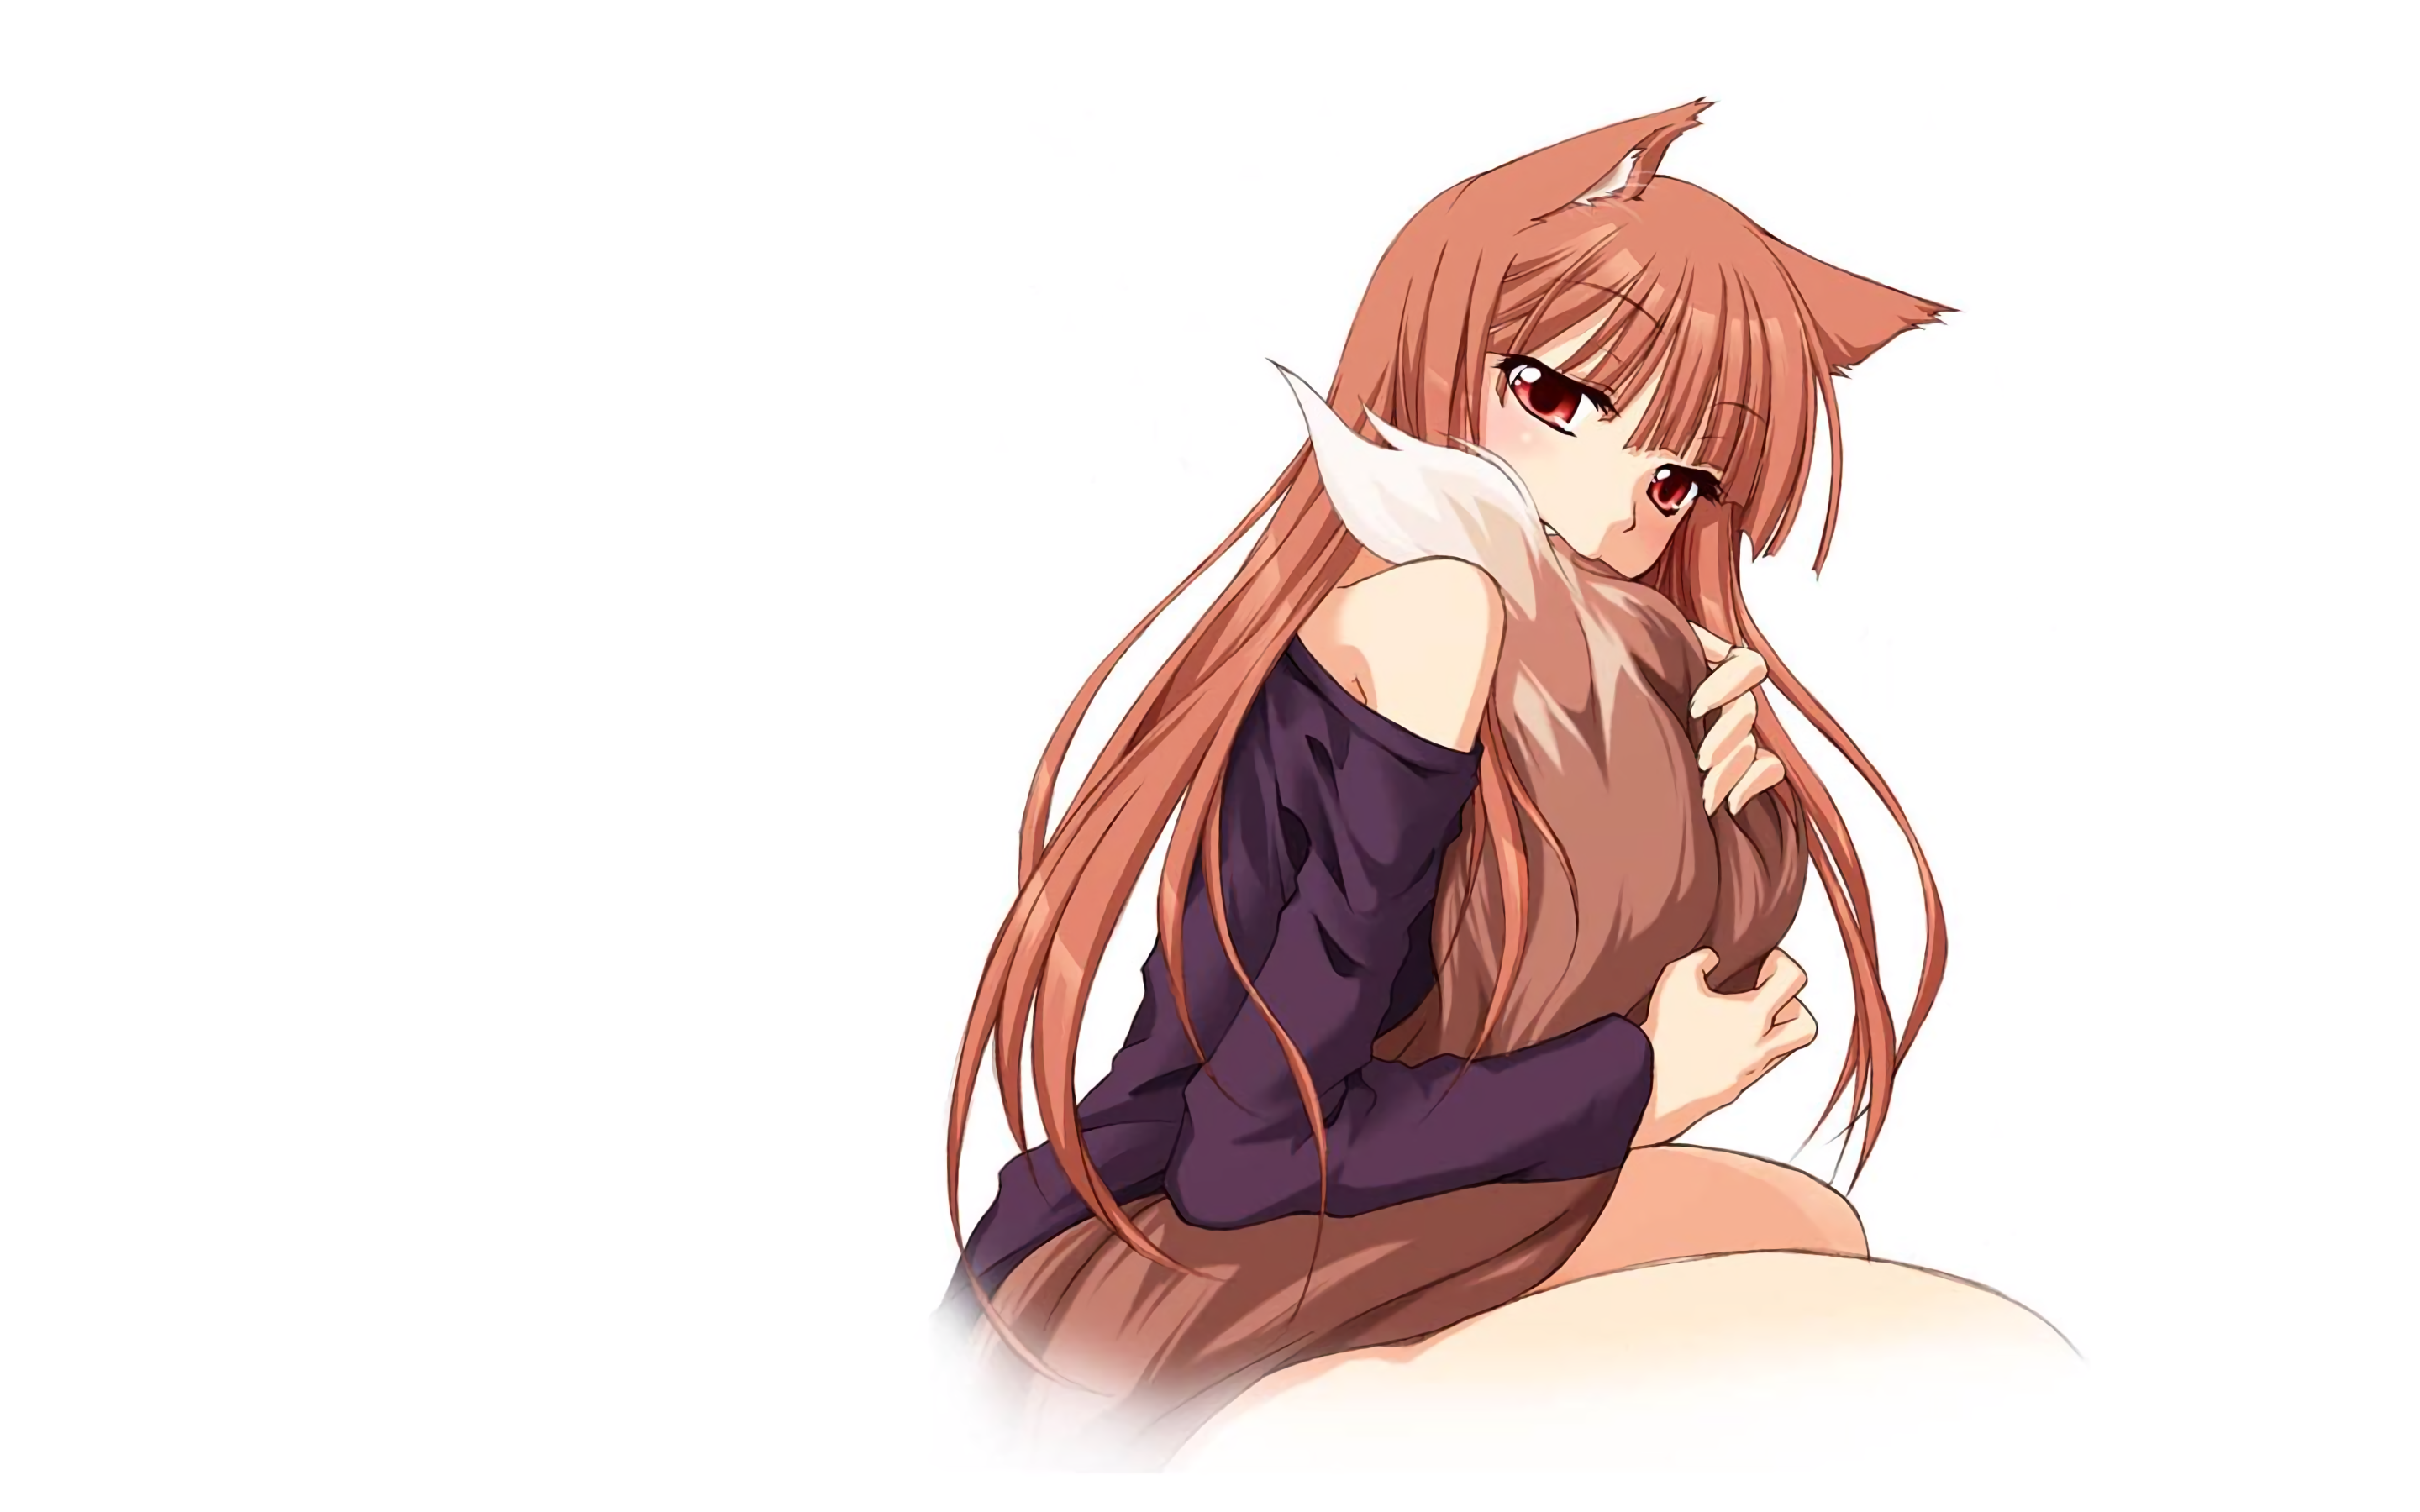 Red-eyed girl with long brown hair, animal ears, and a tail from Holo (Spice & Wolf).